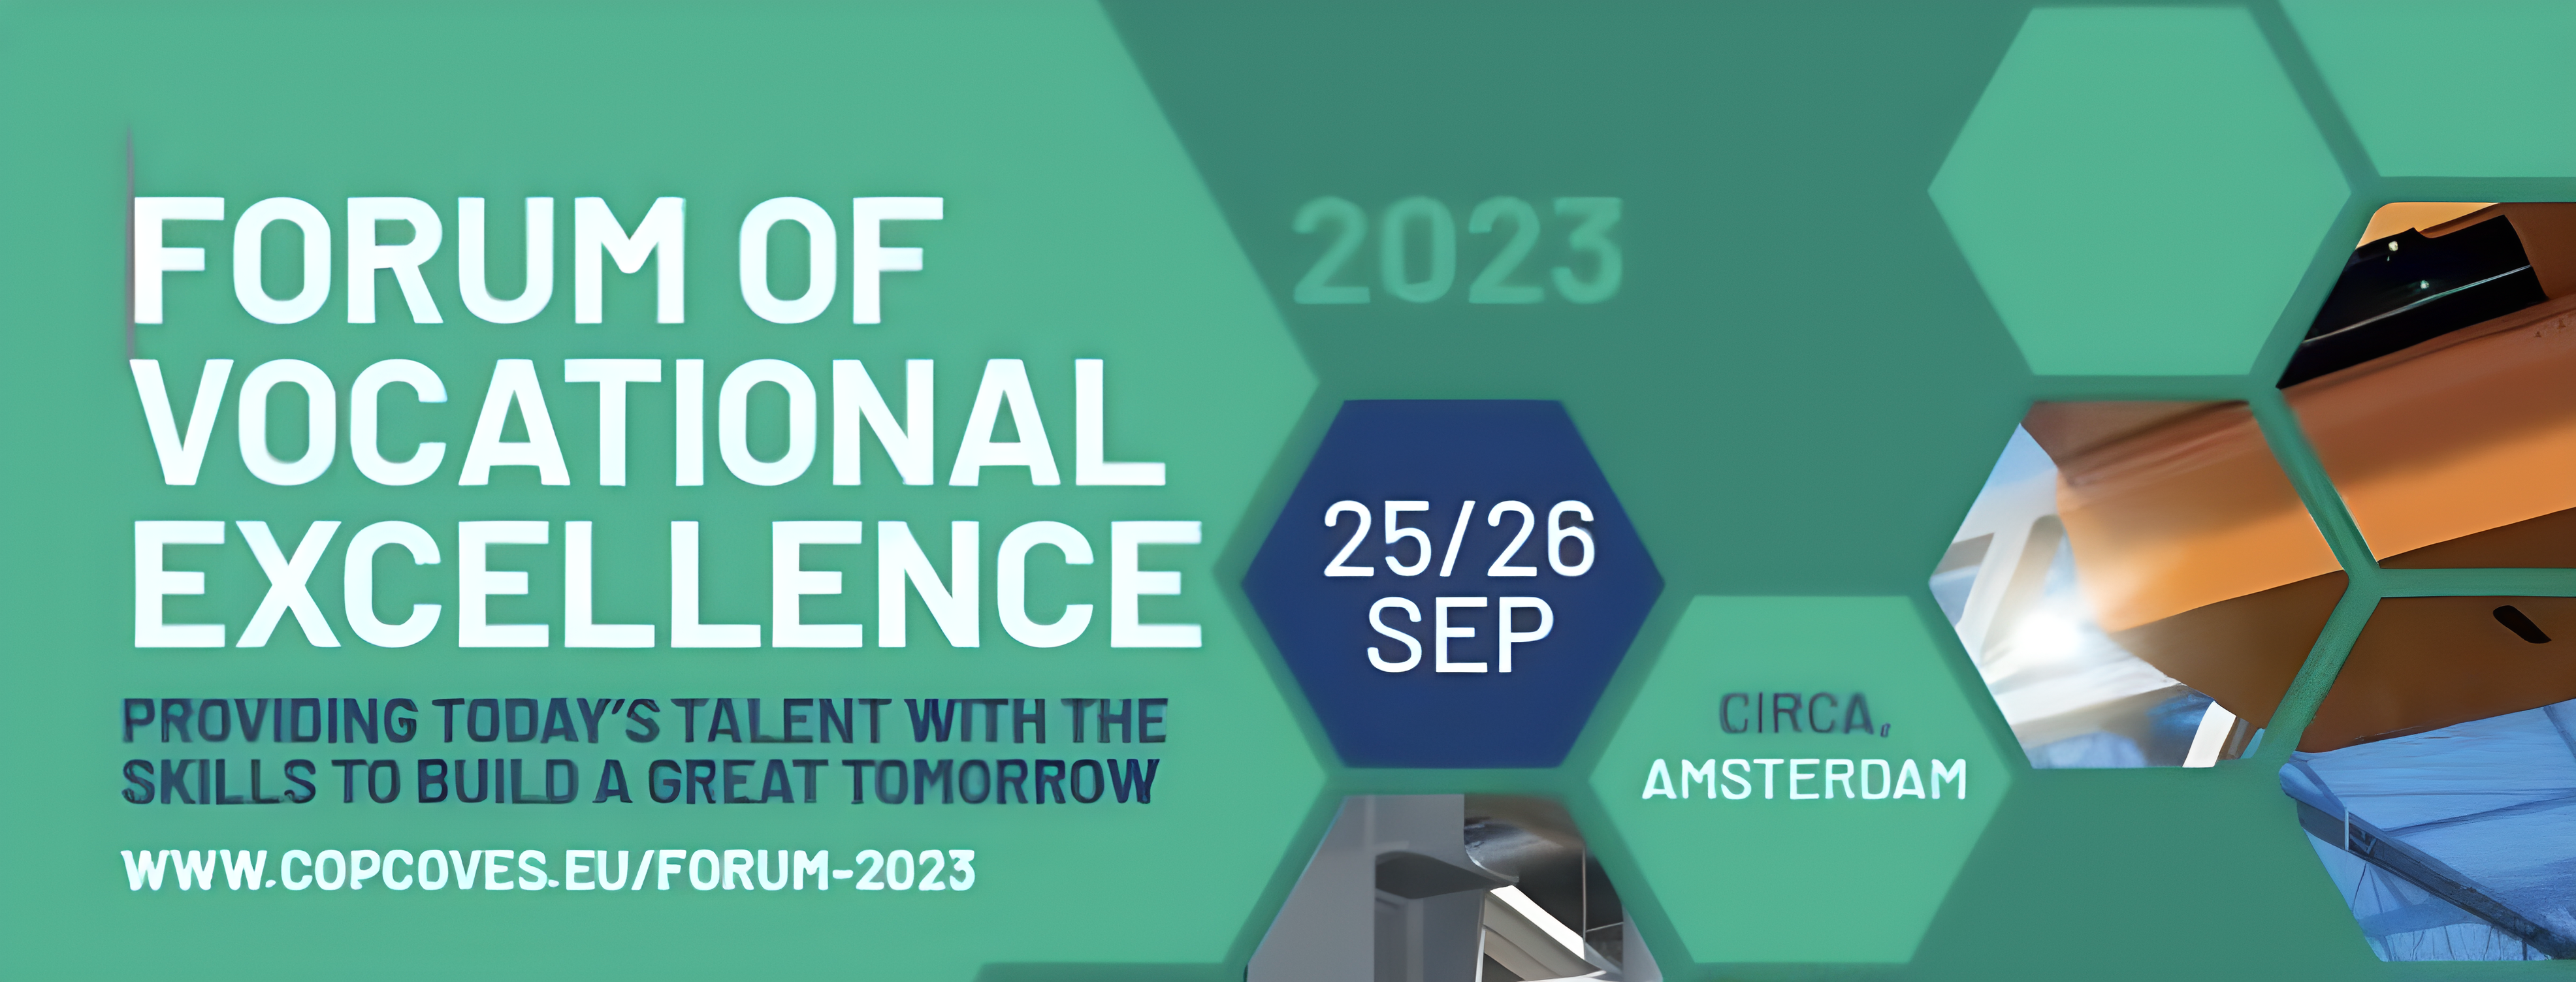 Forum on Vocational Excellence 2023 to be held on September in Amsterdam